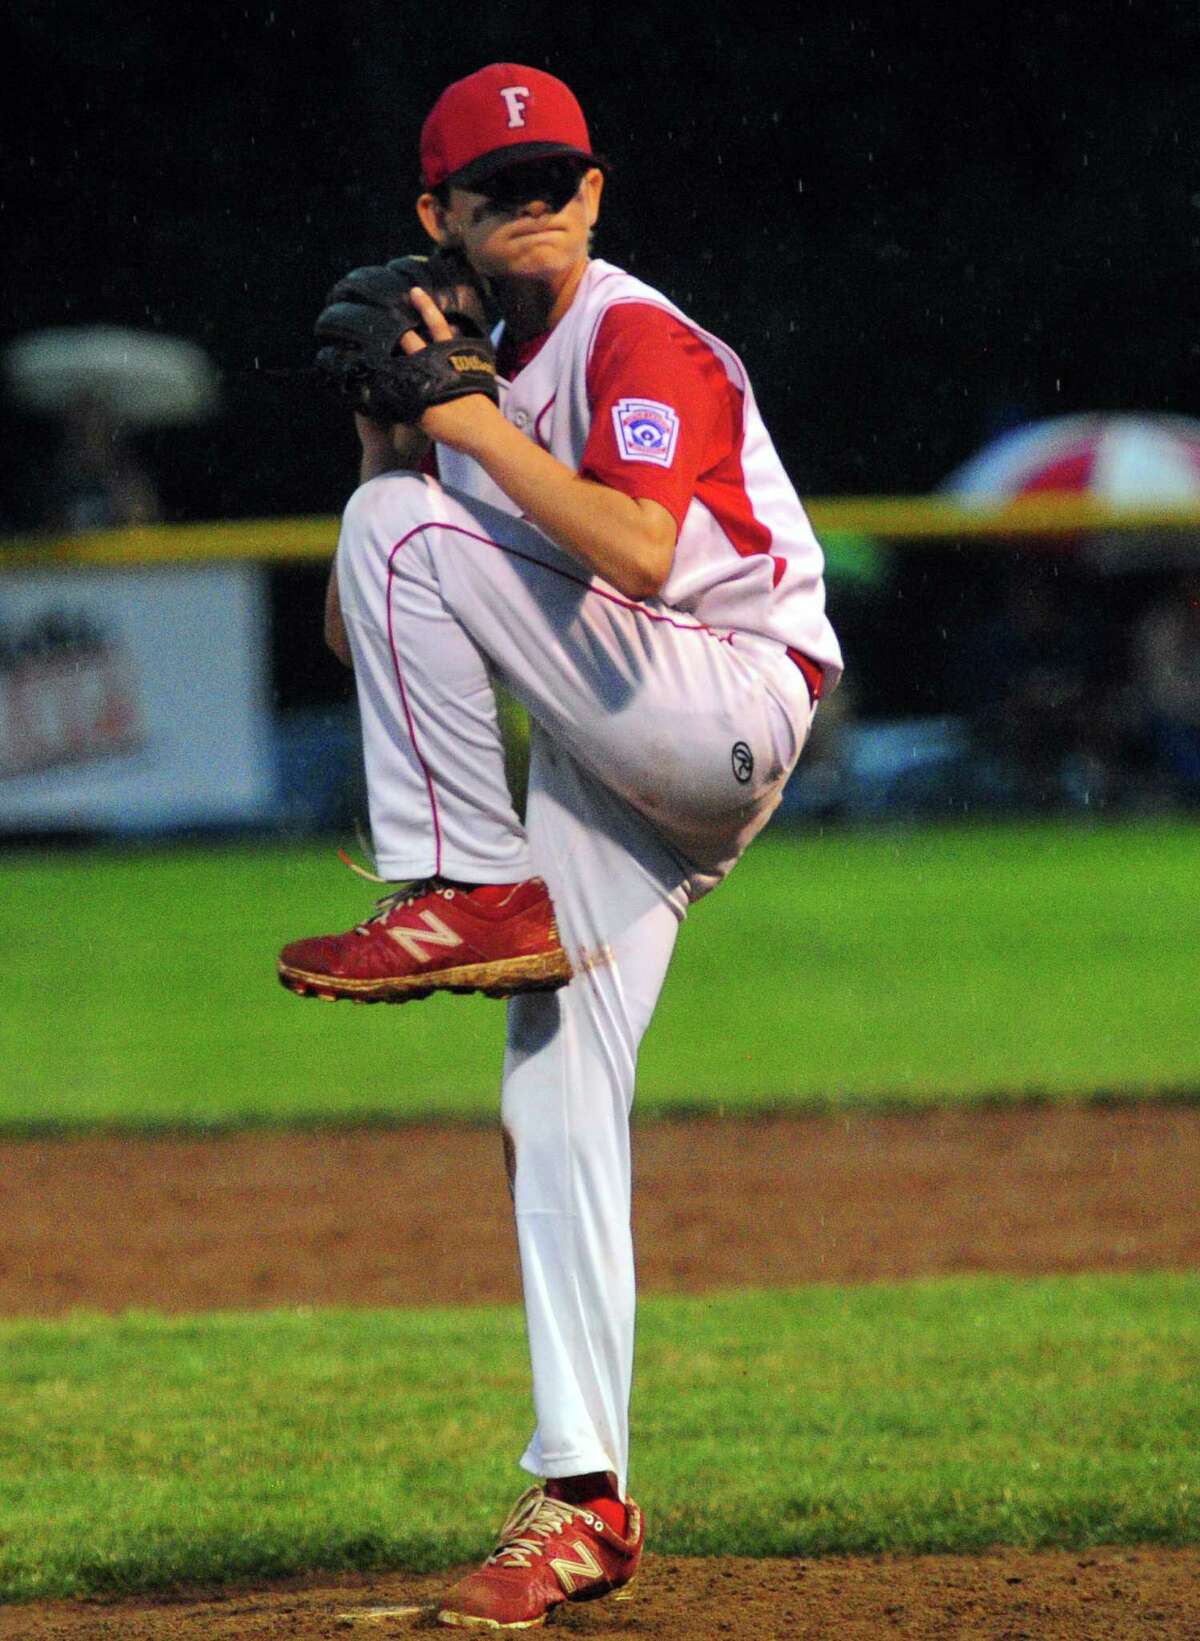 Fairfield American's Matthew Sawyer pitches against Coginchaug in Little League State Championship action in Manchester, Conn., on Saturday July 30, 2016. Fairfield American beat Coginchaug 6-3.